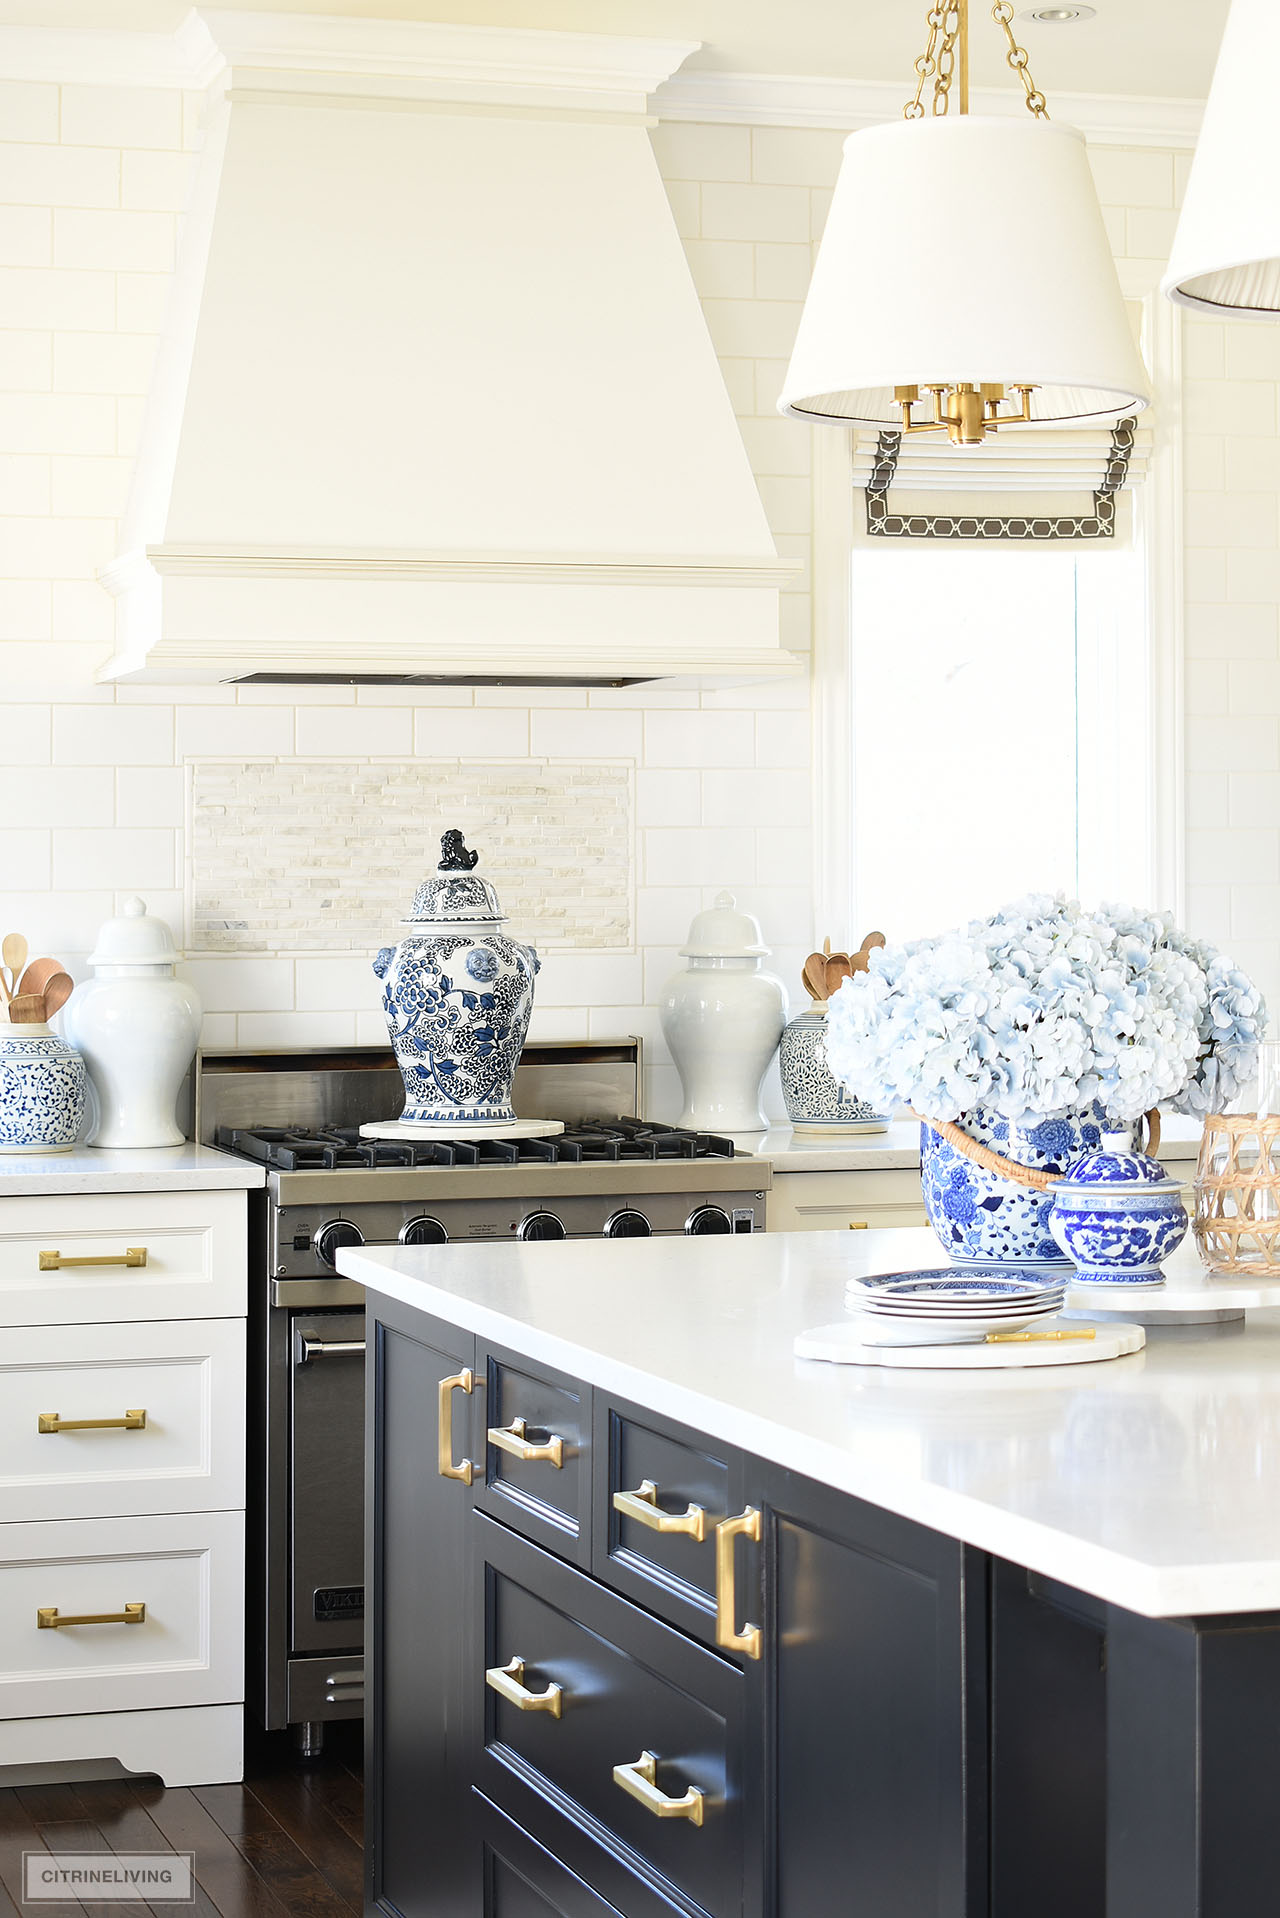 Kitchen island and stove styled for spring using beautiful blue and white chinoiserie pieces and faux light blue hydrangeas.